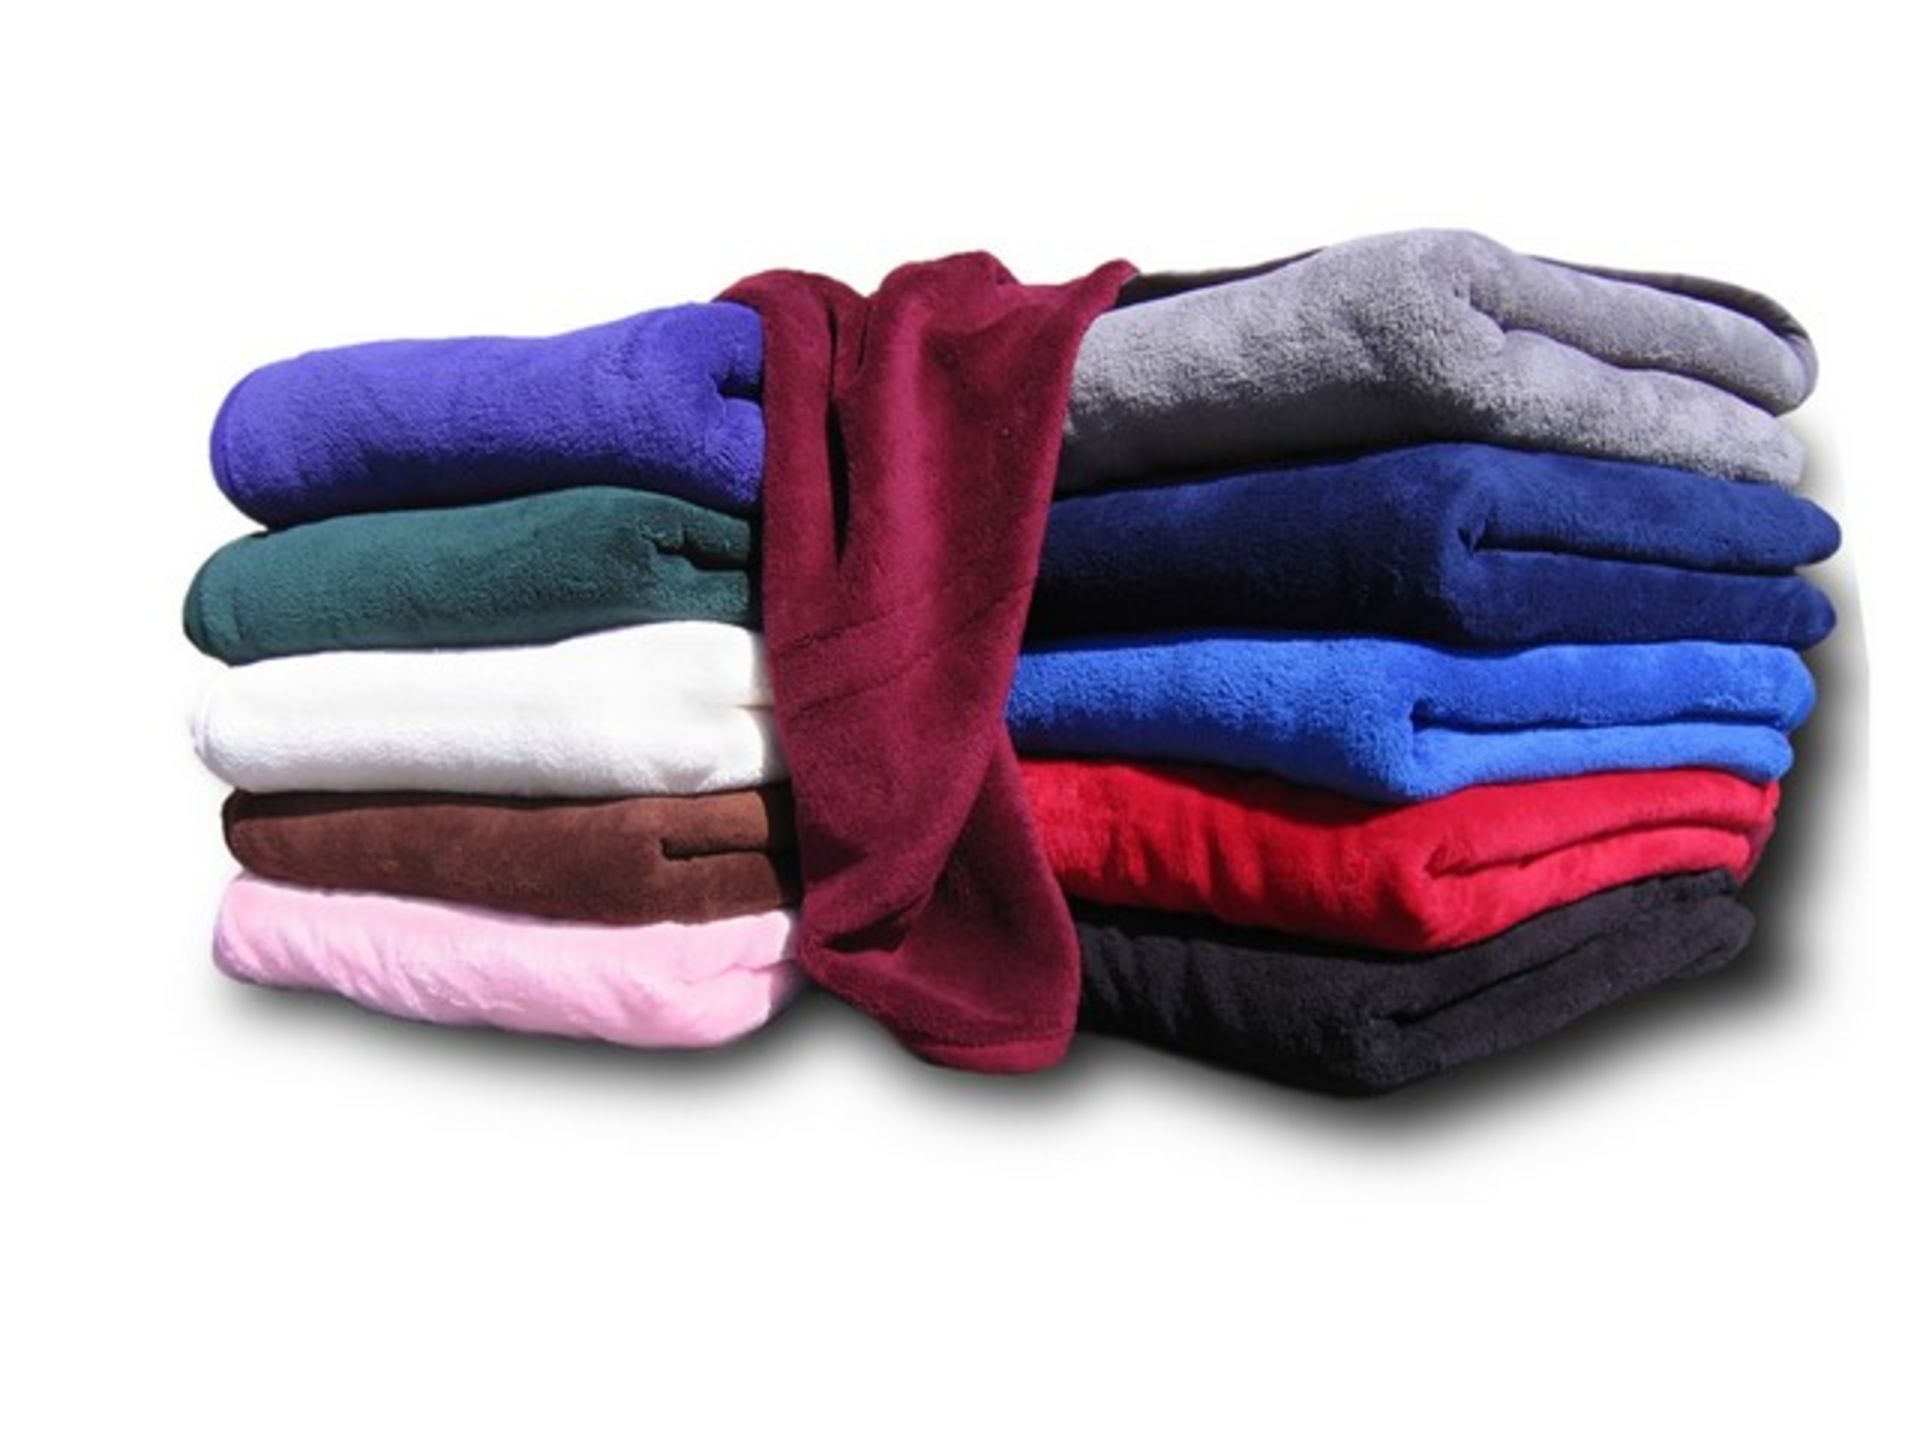 V Brand New Super Soft Coral Fleece Throw 150 cm x 200 cm Double size RRP £19.99 Assorted Colours